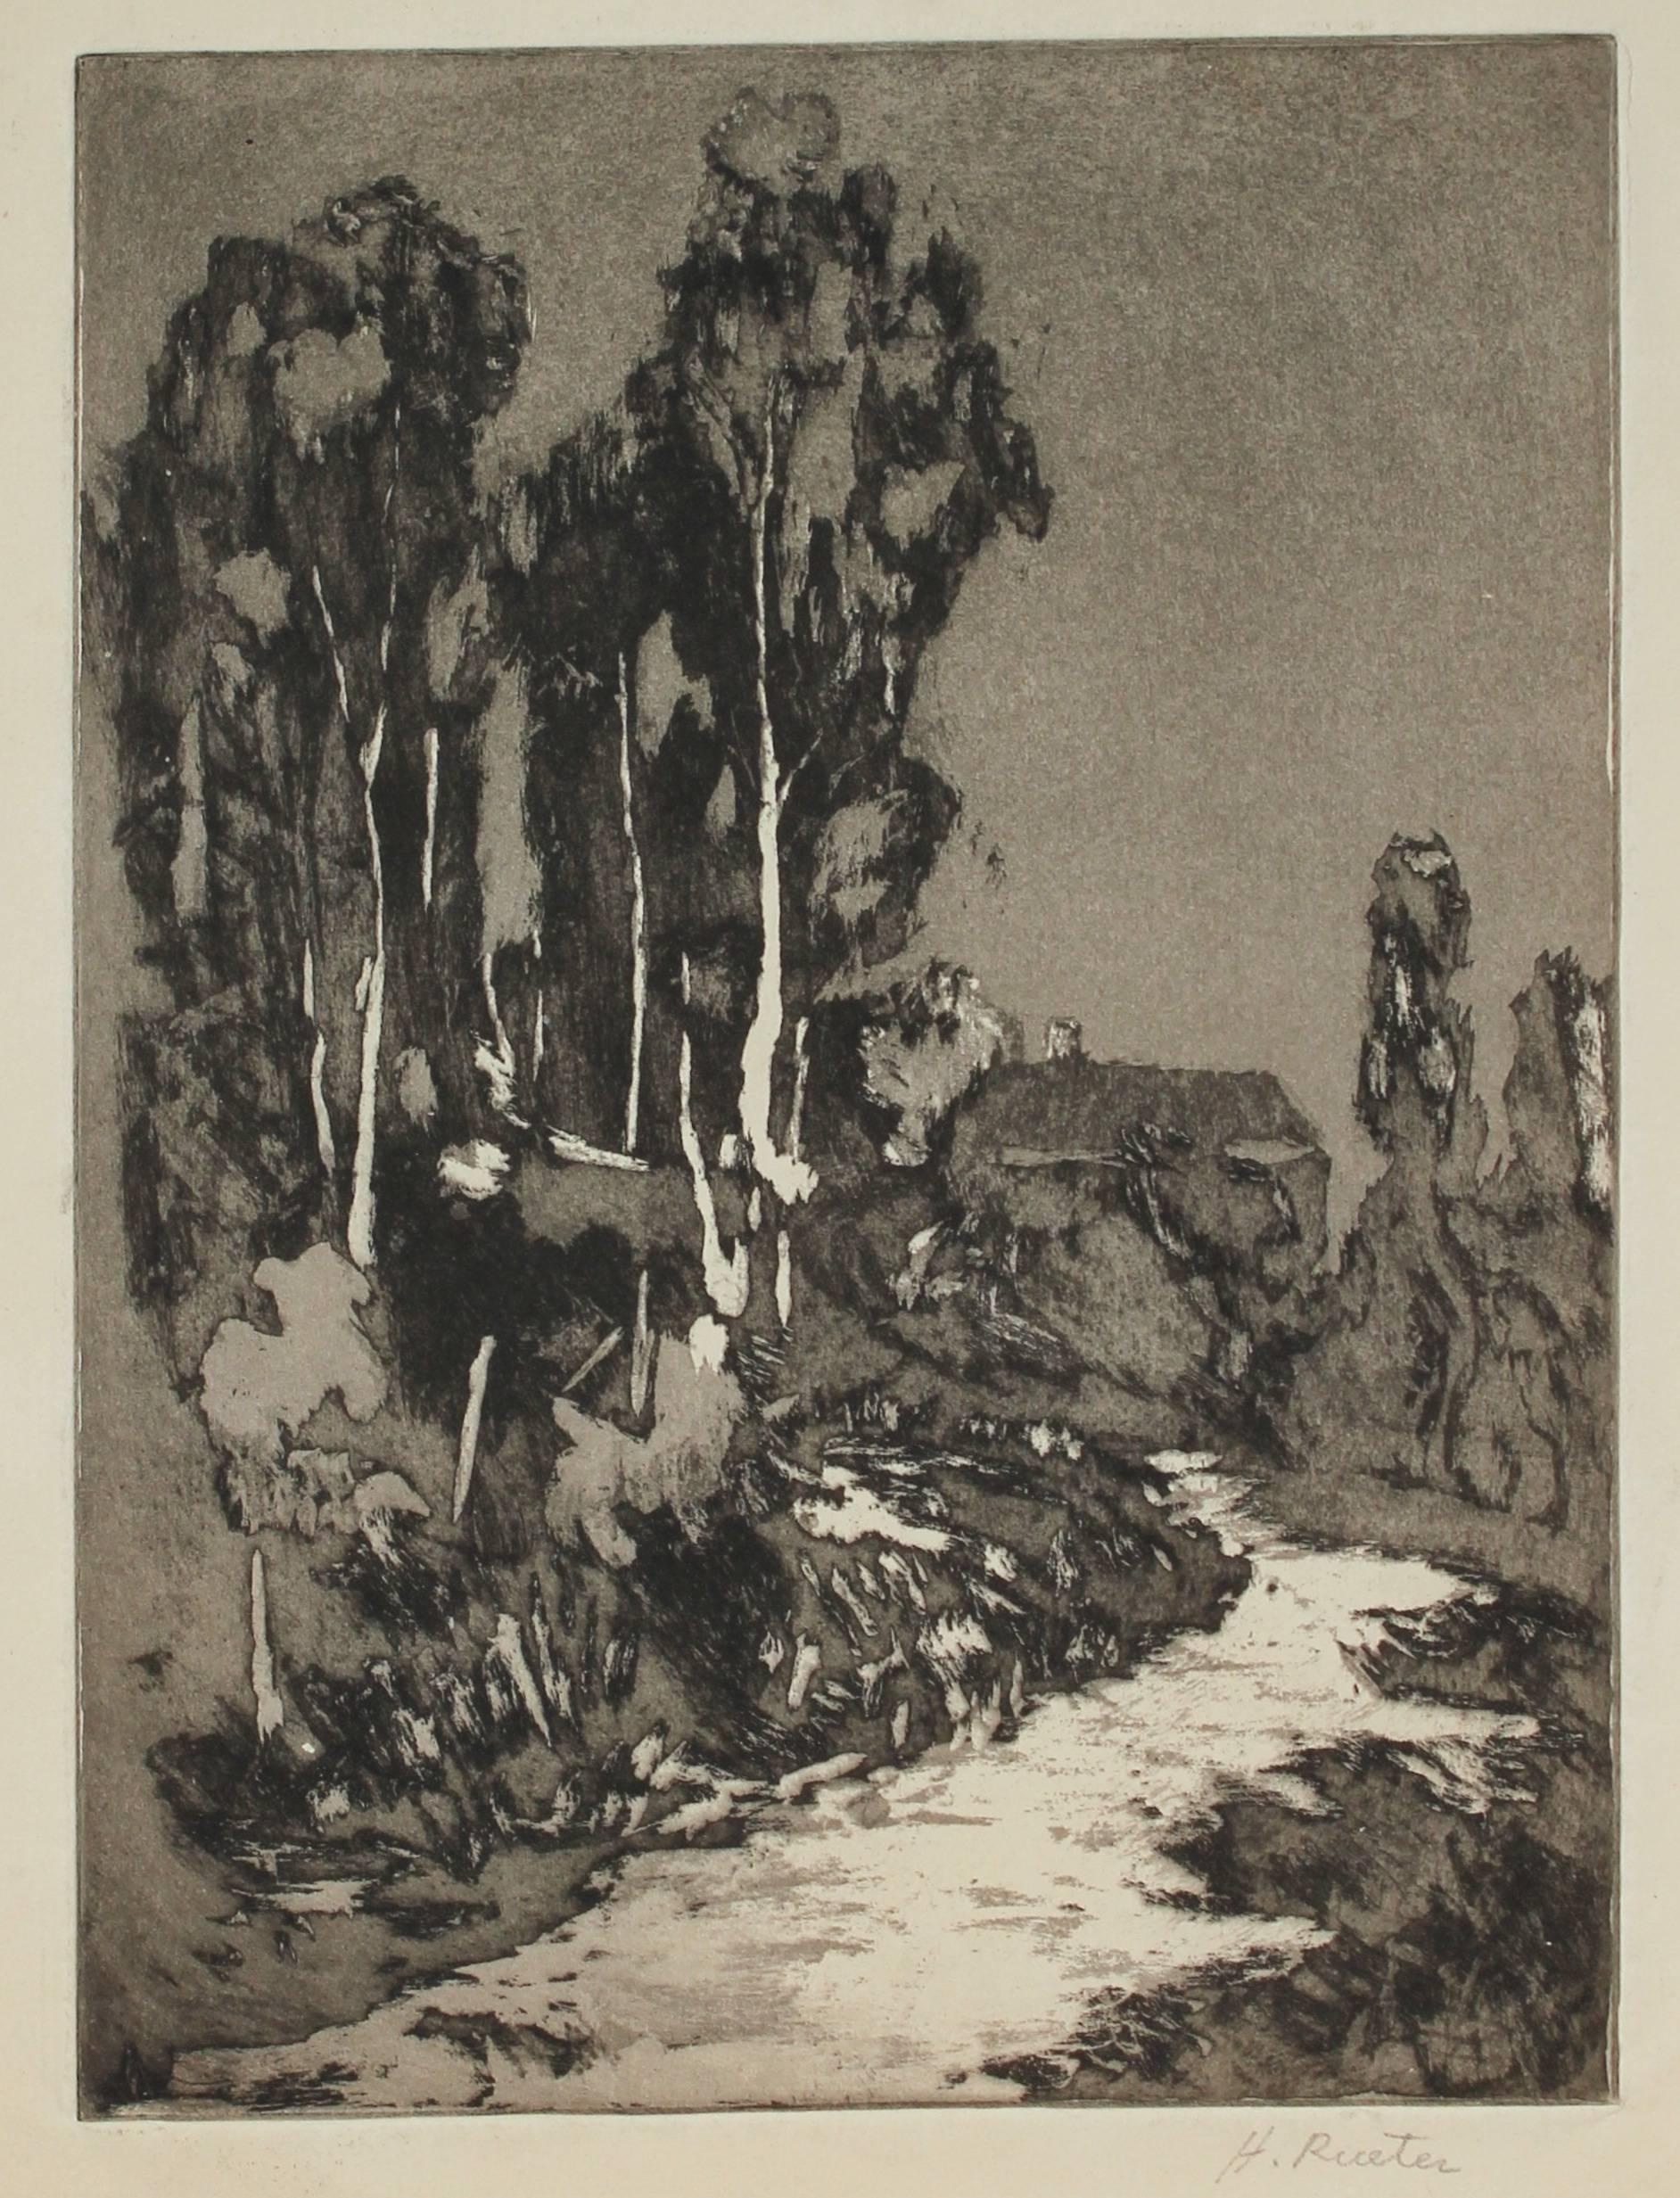 Herman Reuter Landscape Print - Monochromatic California Landscape Etching, Early to Mid 20th Century